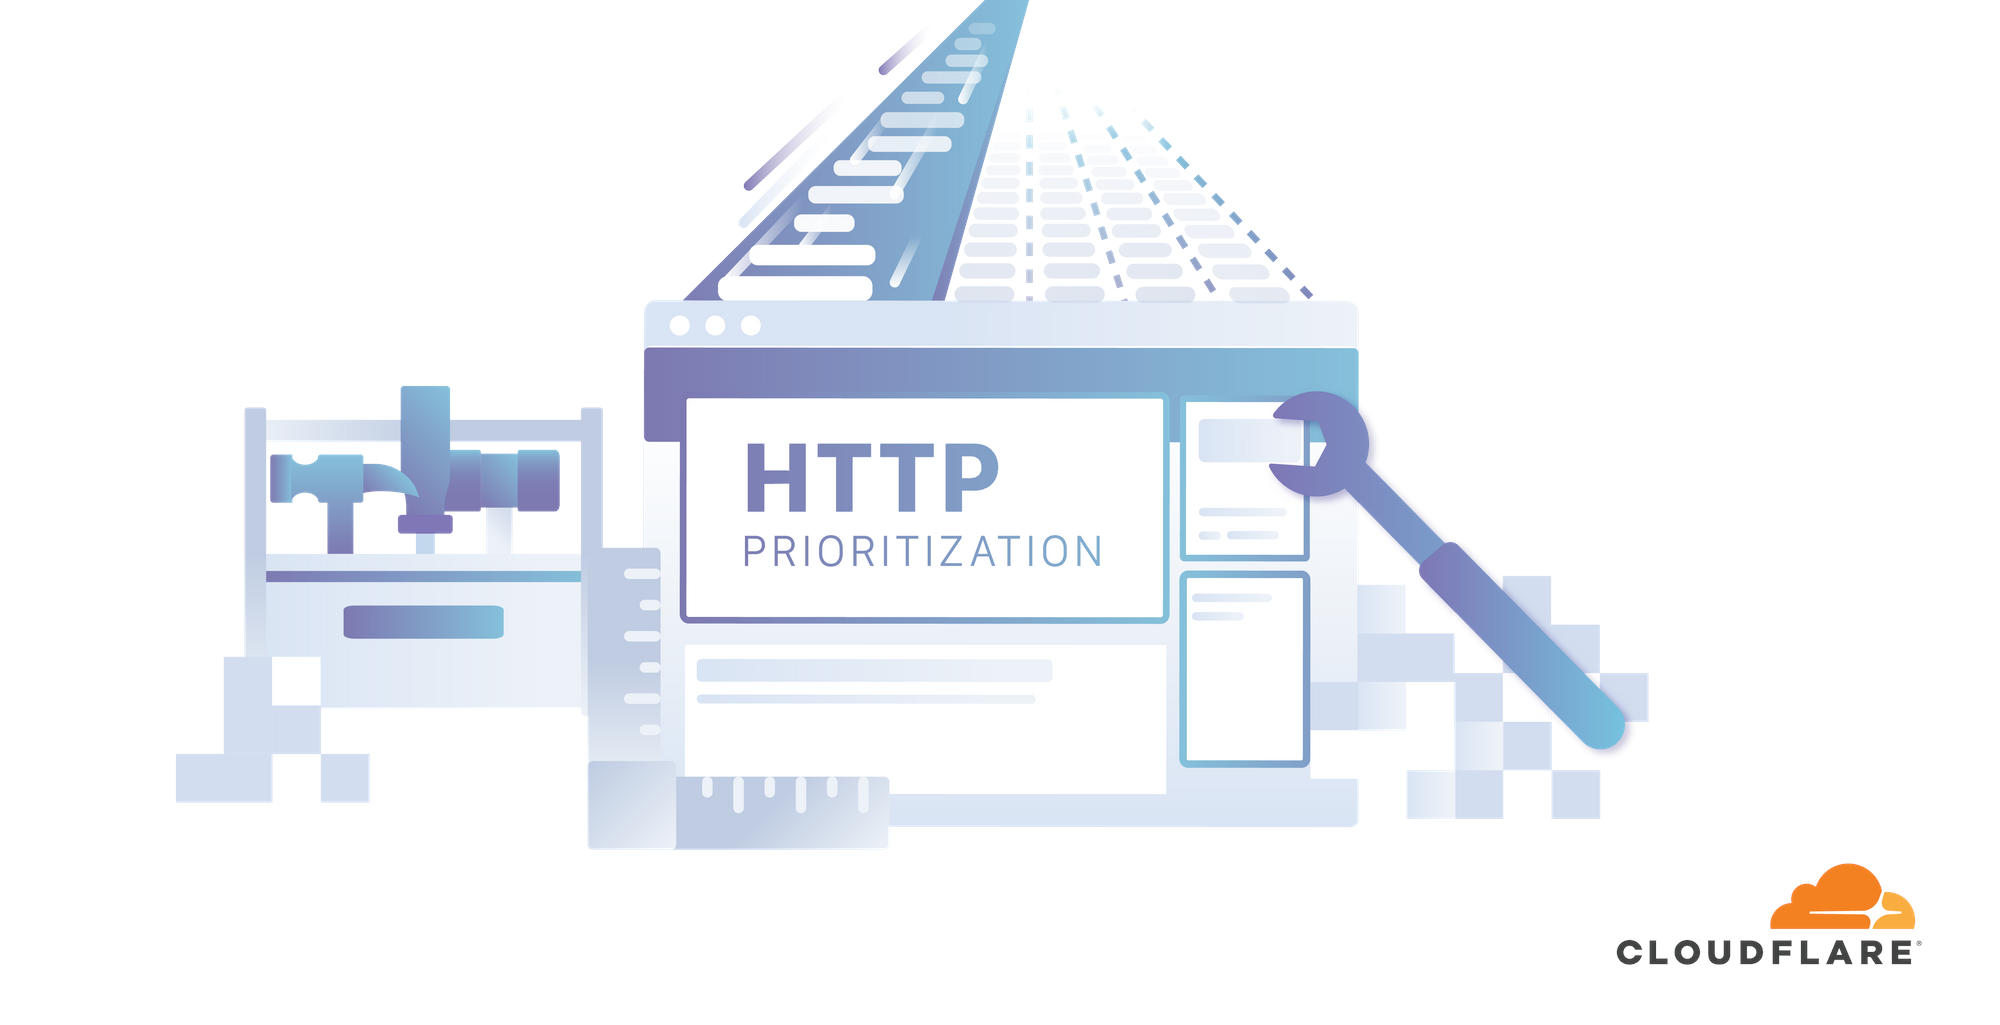 Adopting a new approach to HTTP prioritization